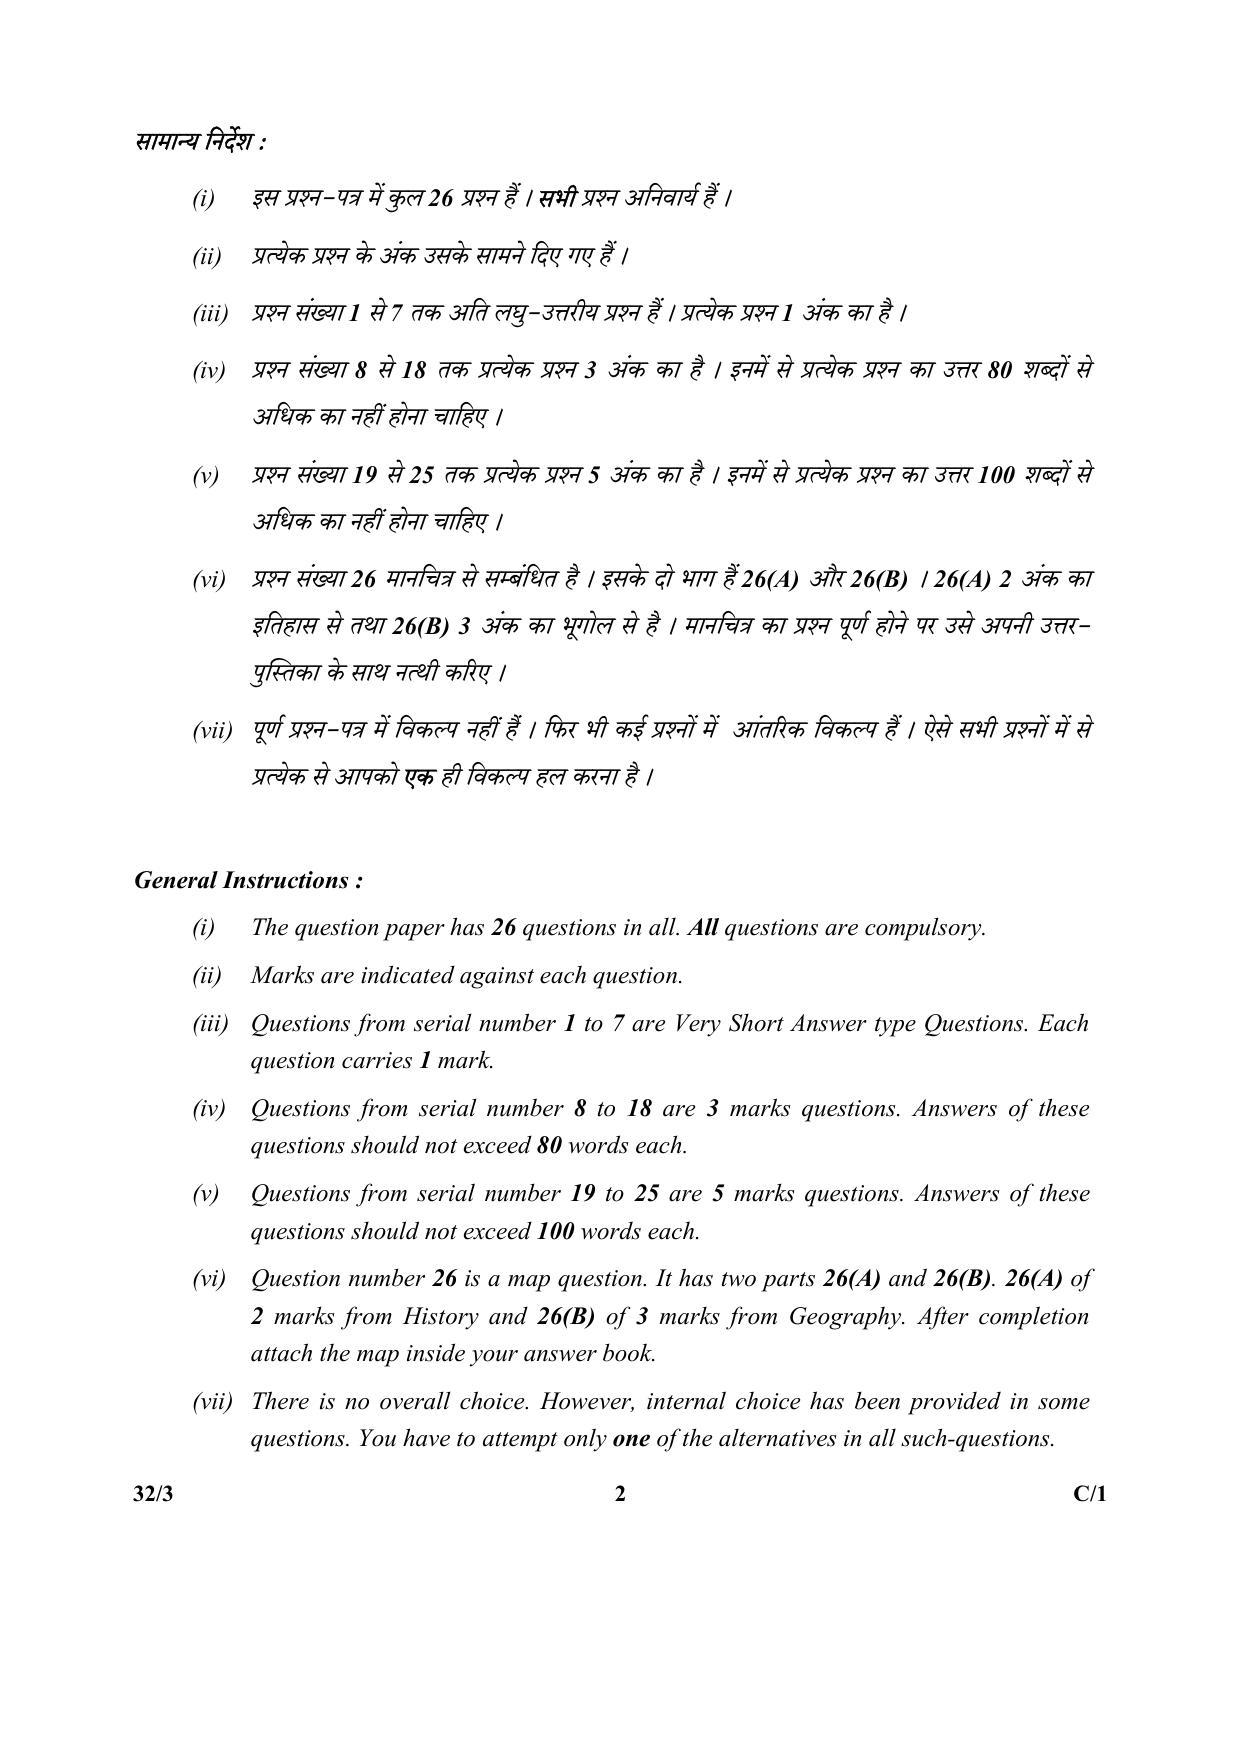 CBSE Class 10 32-3_Social Science 2018 Compartment Question Paper - Page 2